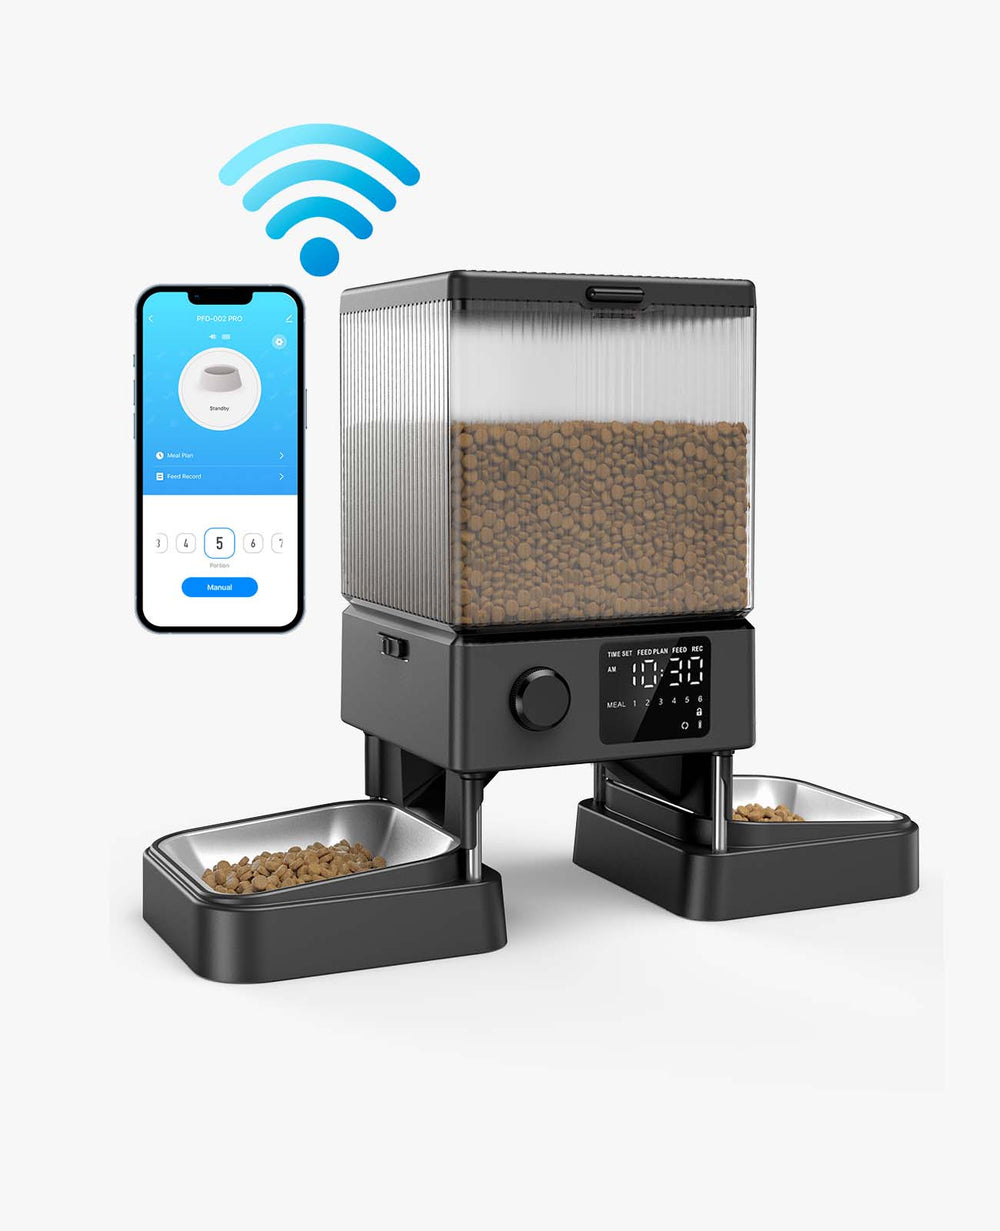 Oneisall 5L Automatic Food Dispenser with 5G Wi-Fi and APP Control